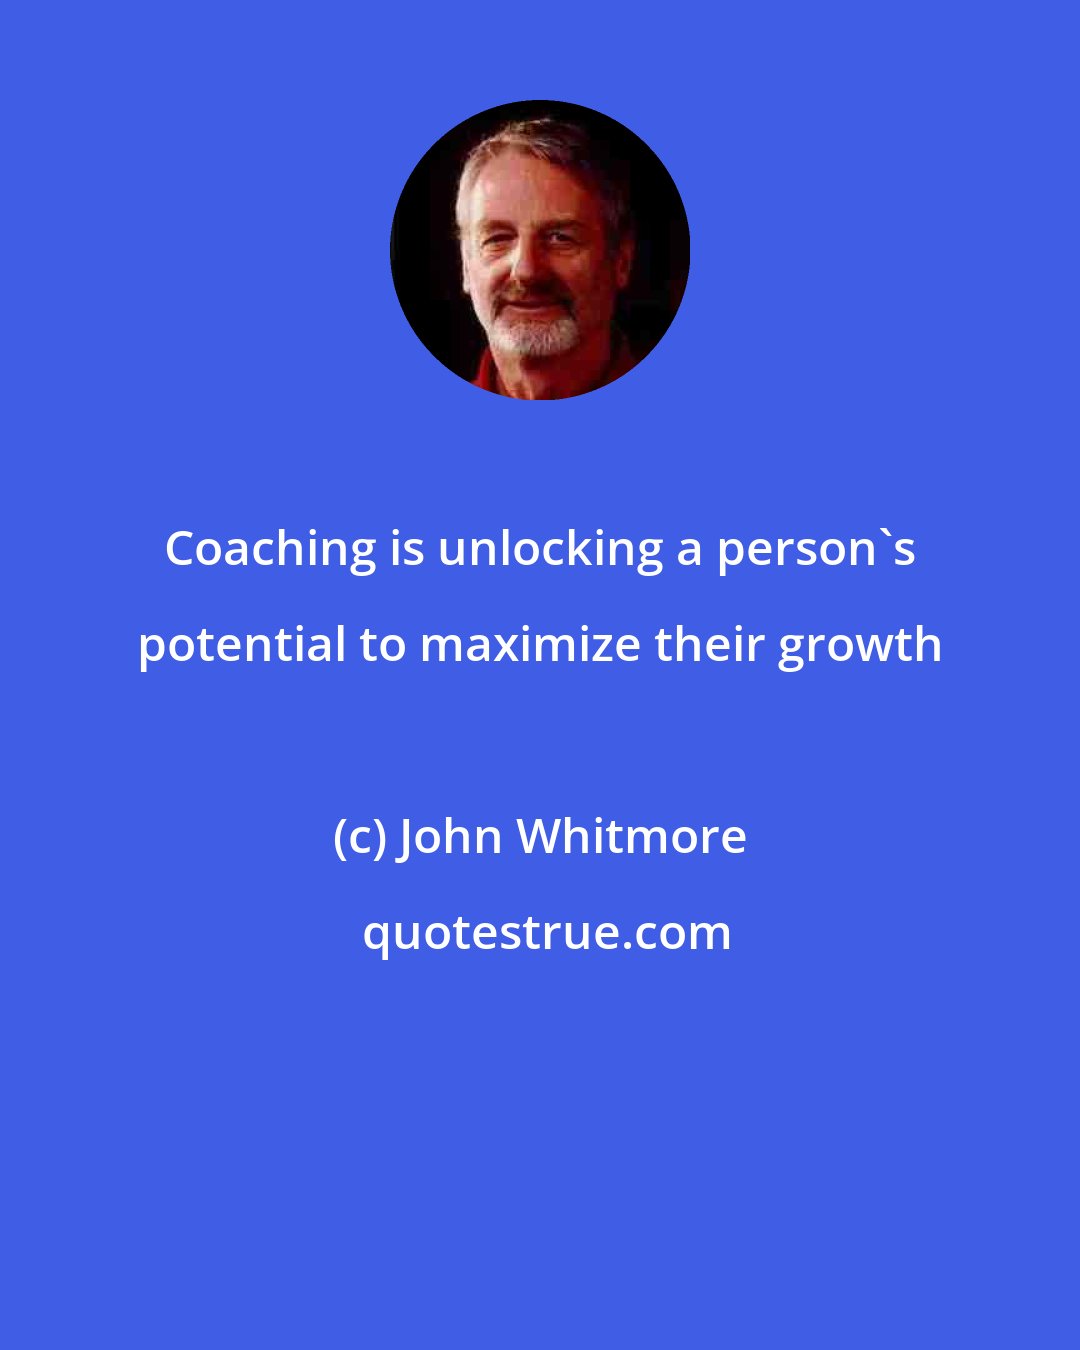 John Whitmore: Coaching is unlocking a person's potential to maximize their growth